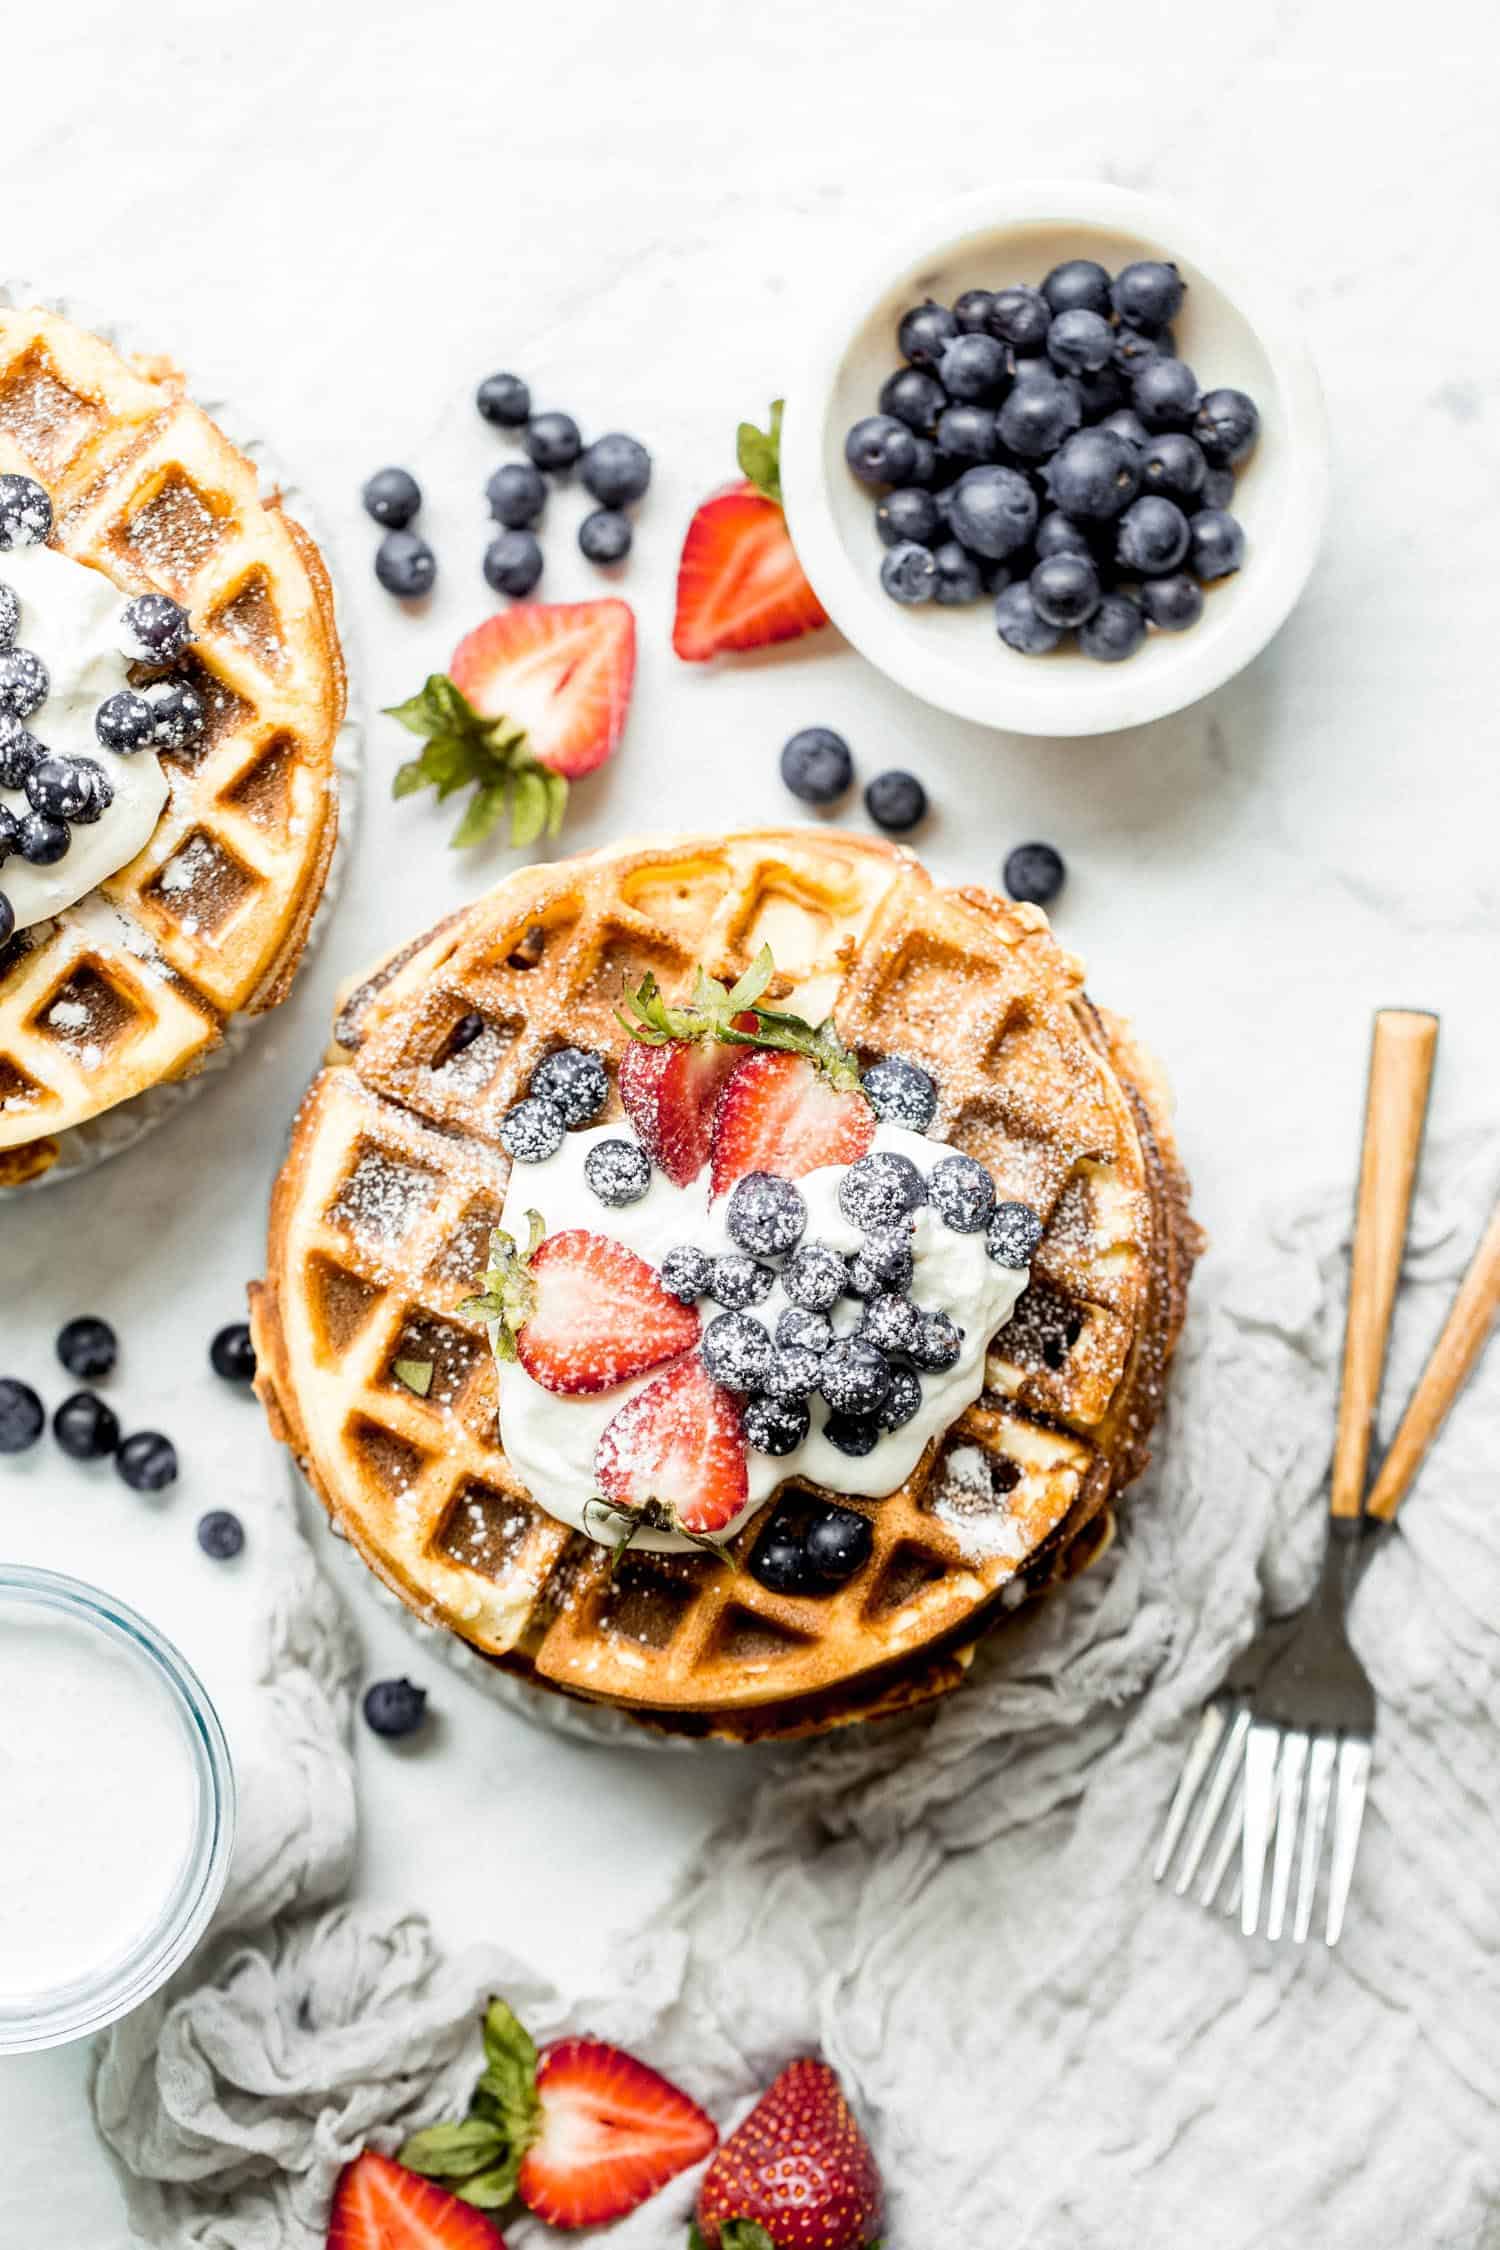 two stacks of paleo waffles on plates with berries